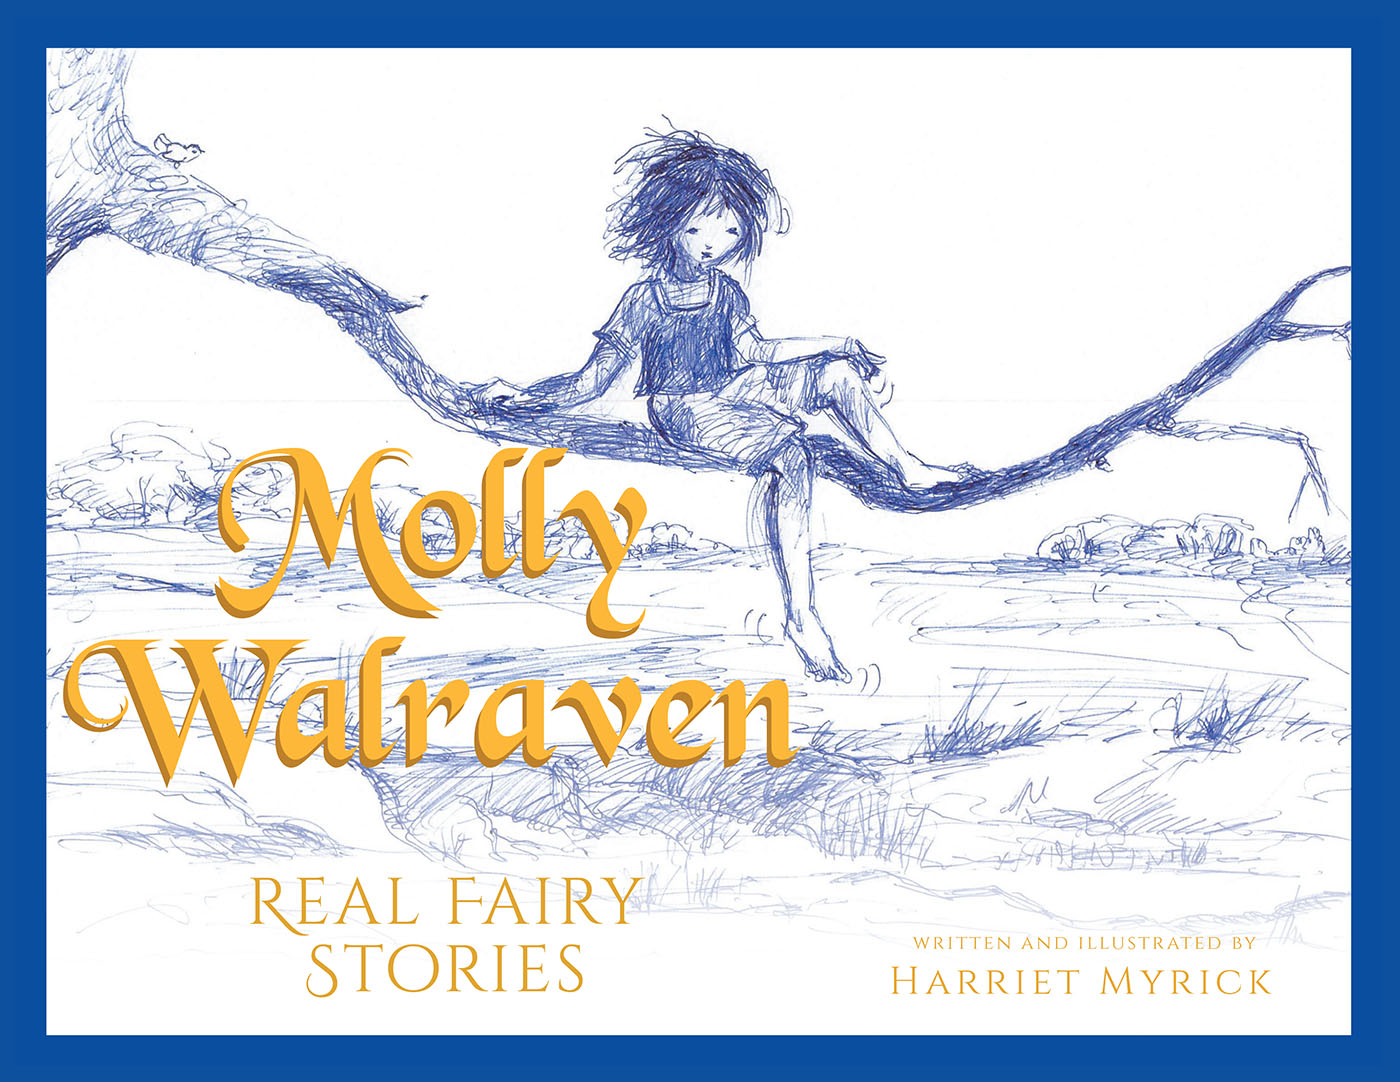 Harriet Myrick’s New Book, "Molly Walraven: Real Fairy Stories," Introduces Readers to a World of Fairies Found in Everyday Places Right Under Their Noses